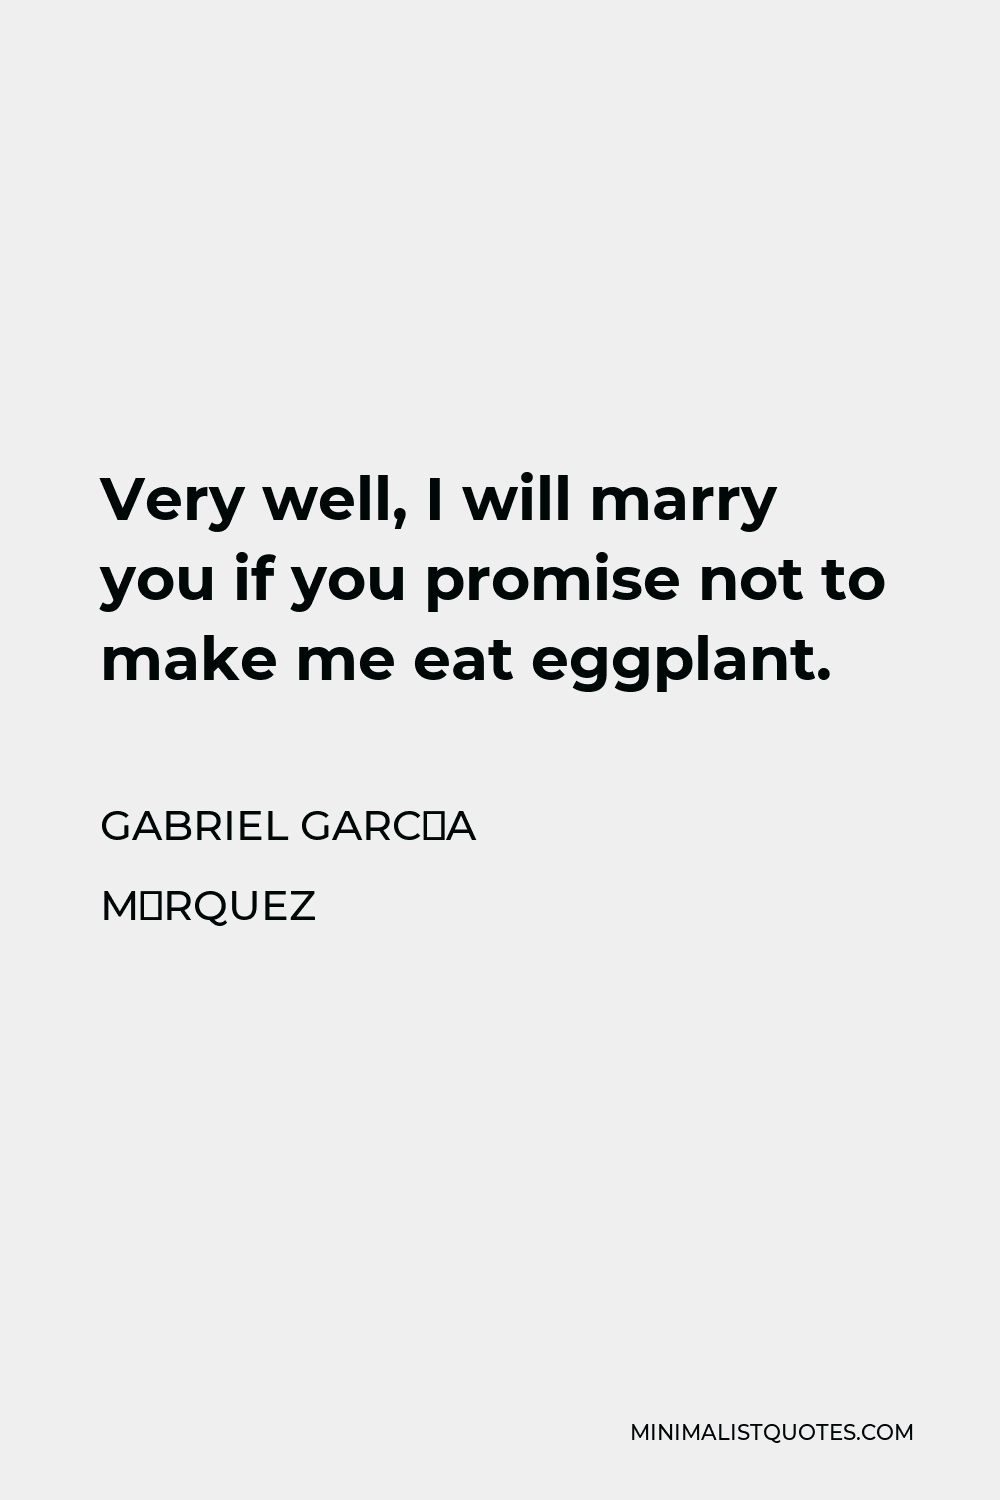 Gabriel García Márquez Quote - Very well, I will marry you if you promise not to make me eat eggplant.